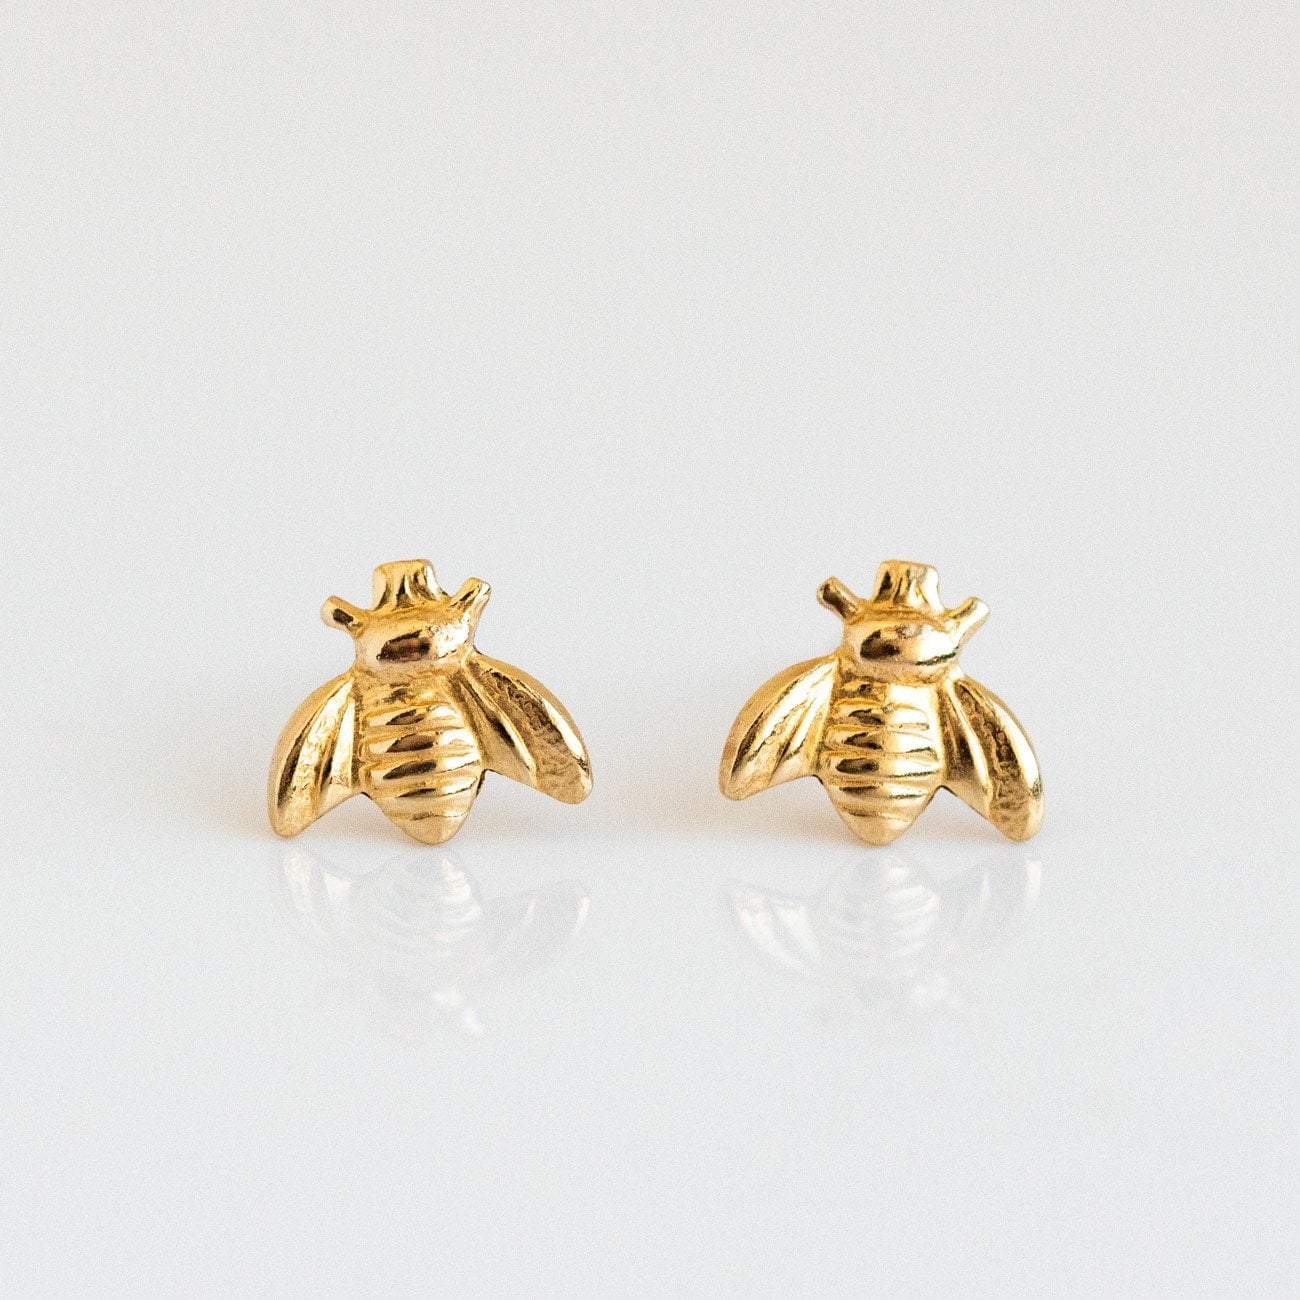 Local Eclectic Tiny Yellow Gold Bumble Bee Stud Earrings